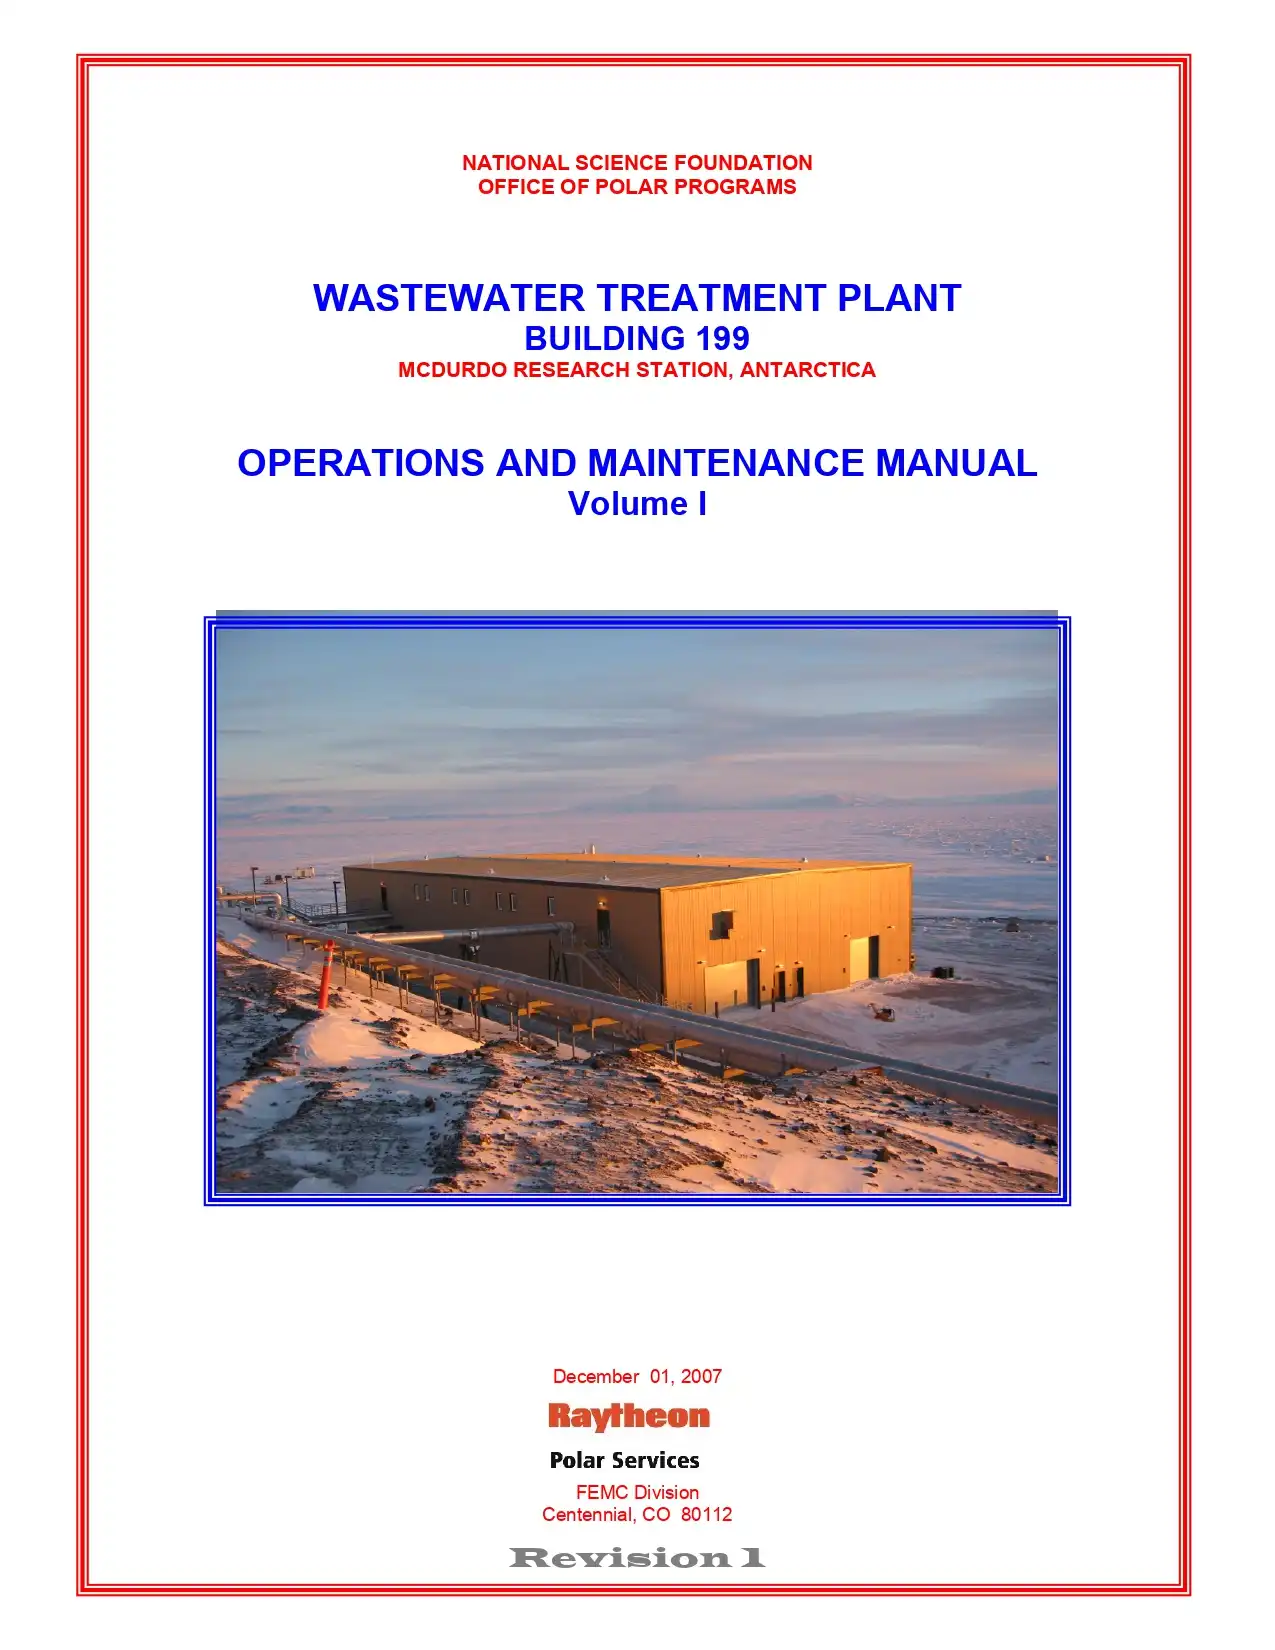 Wastewater Treatment Plant Building 199